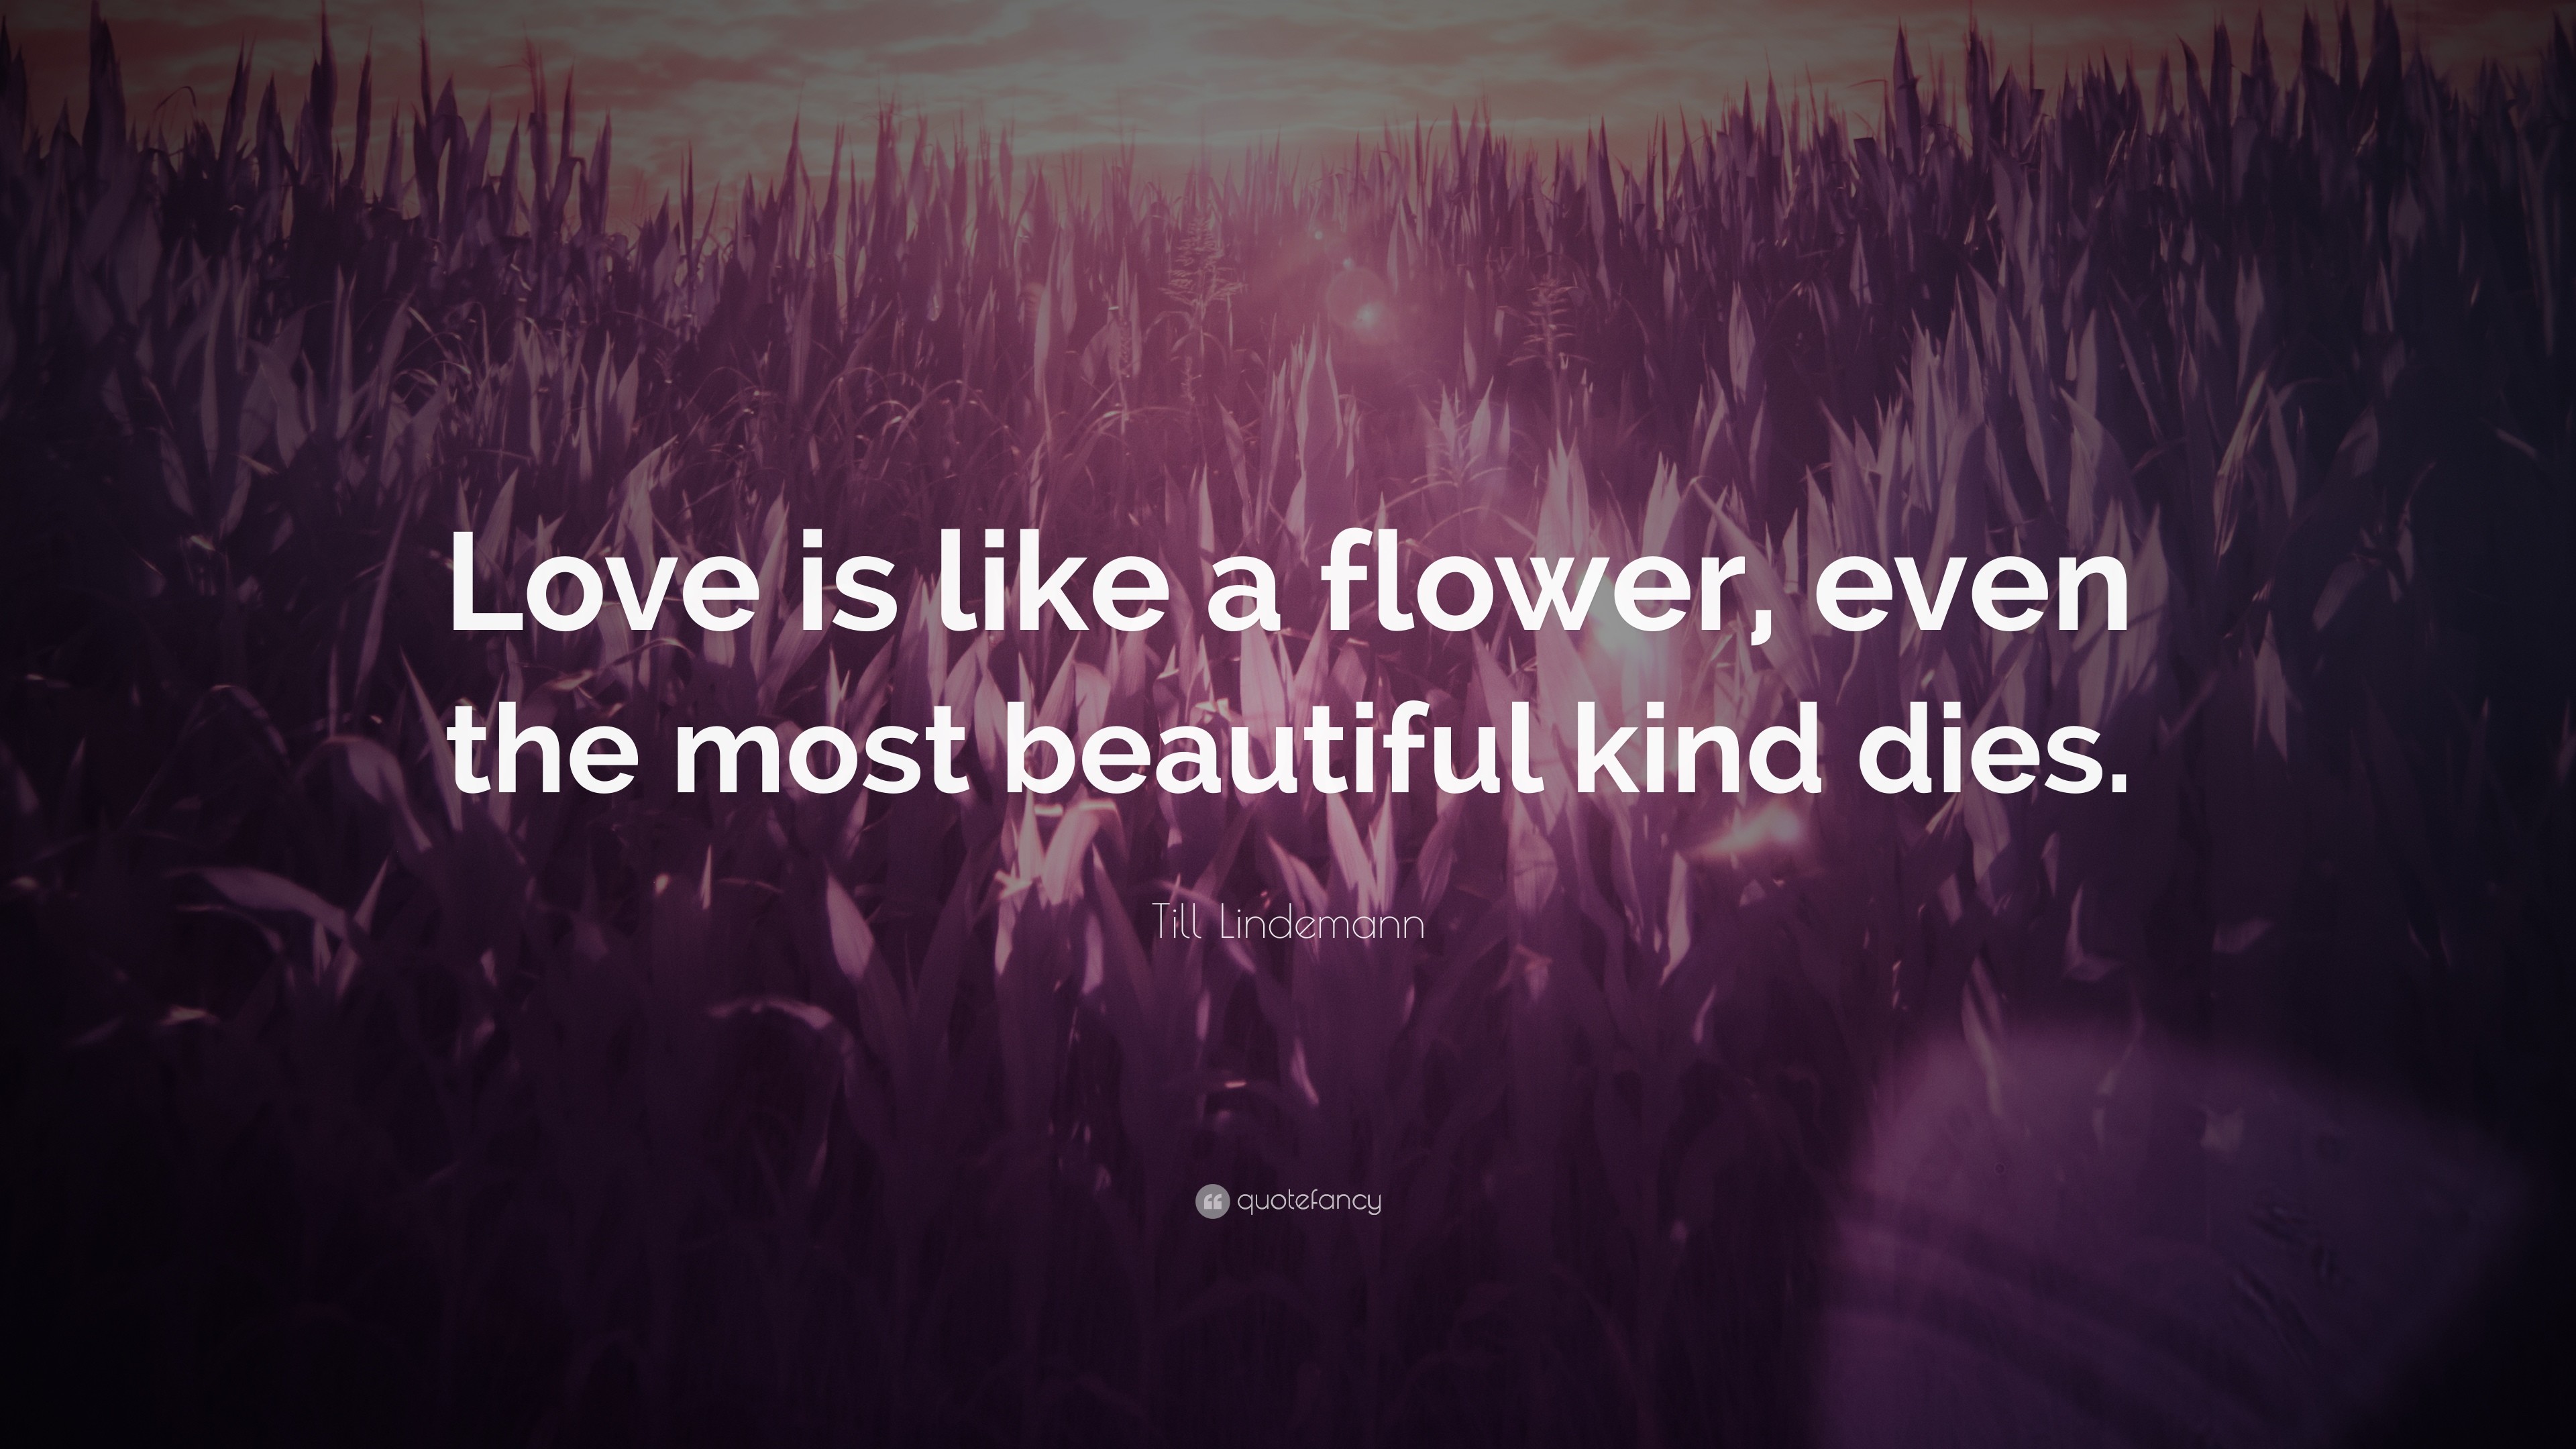 3840x2160 Till Lindemann Quote: "Love is like a flower, even the most beautiful...